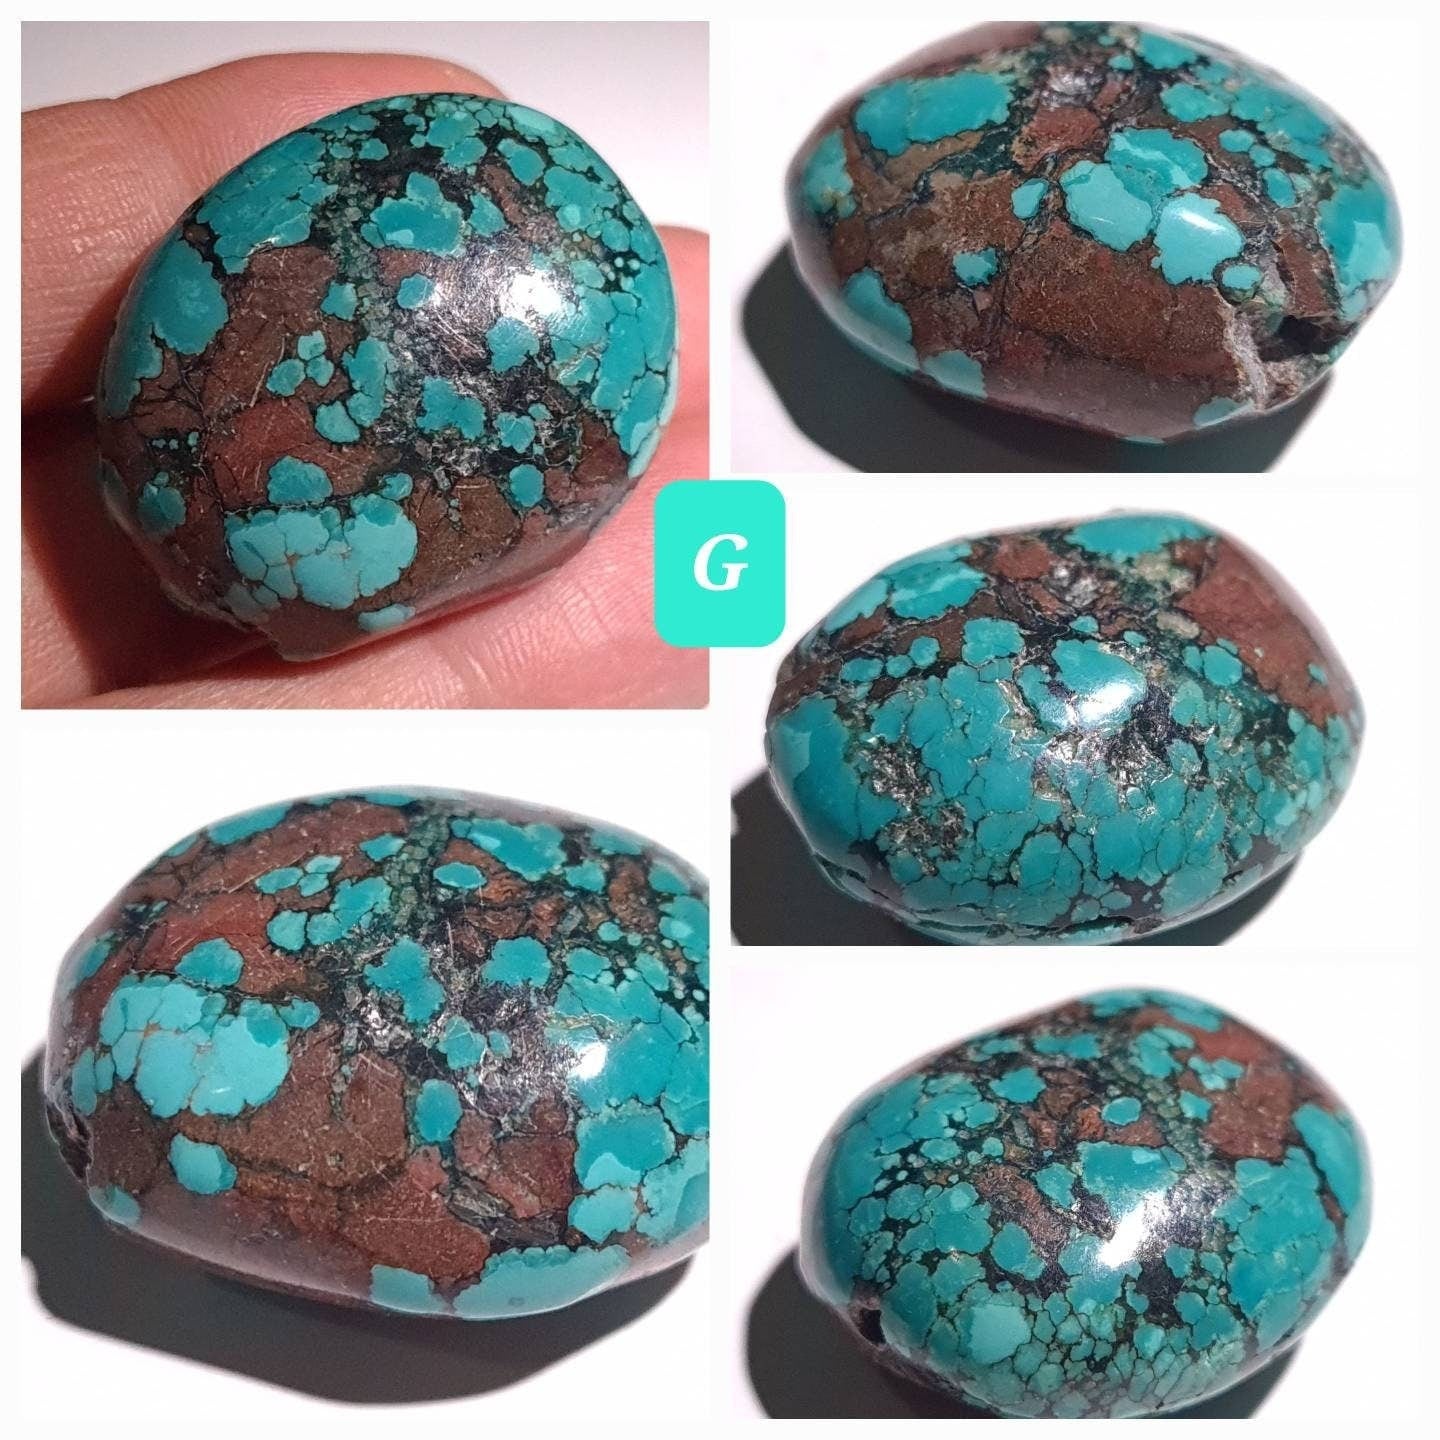 Turquoise Pebble, AAA Tibetan Spiderweb Blue-Greenish Turquoise Pebble ,Rare, Jewelry Focal, Pendant, Palm Stone or Collection Healing Gem